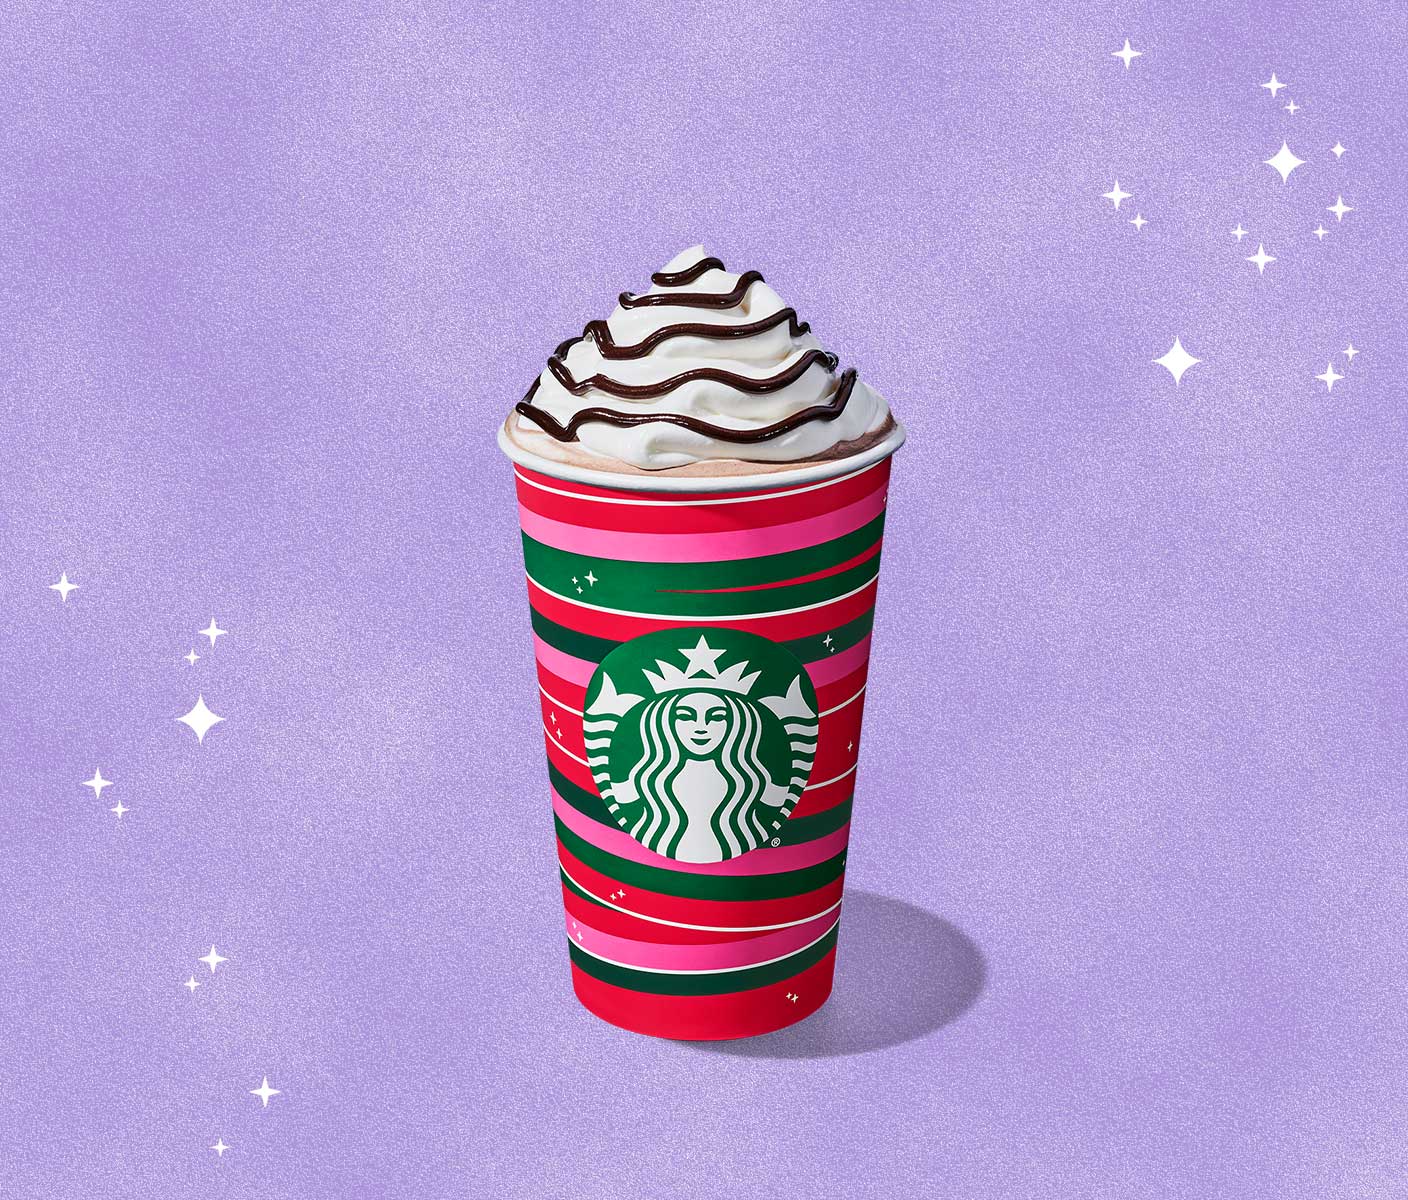 Hot chocolate with whipped cream and chocolate drizzle in a holiday-themed to-go cup.